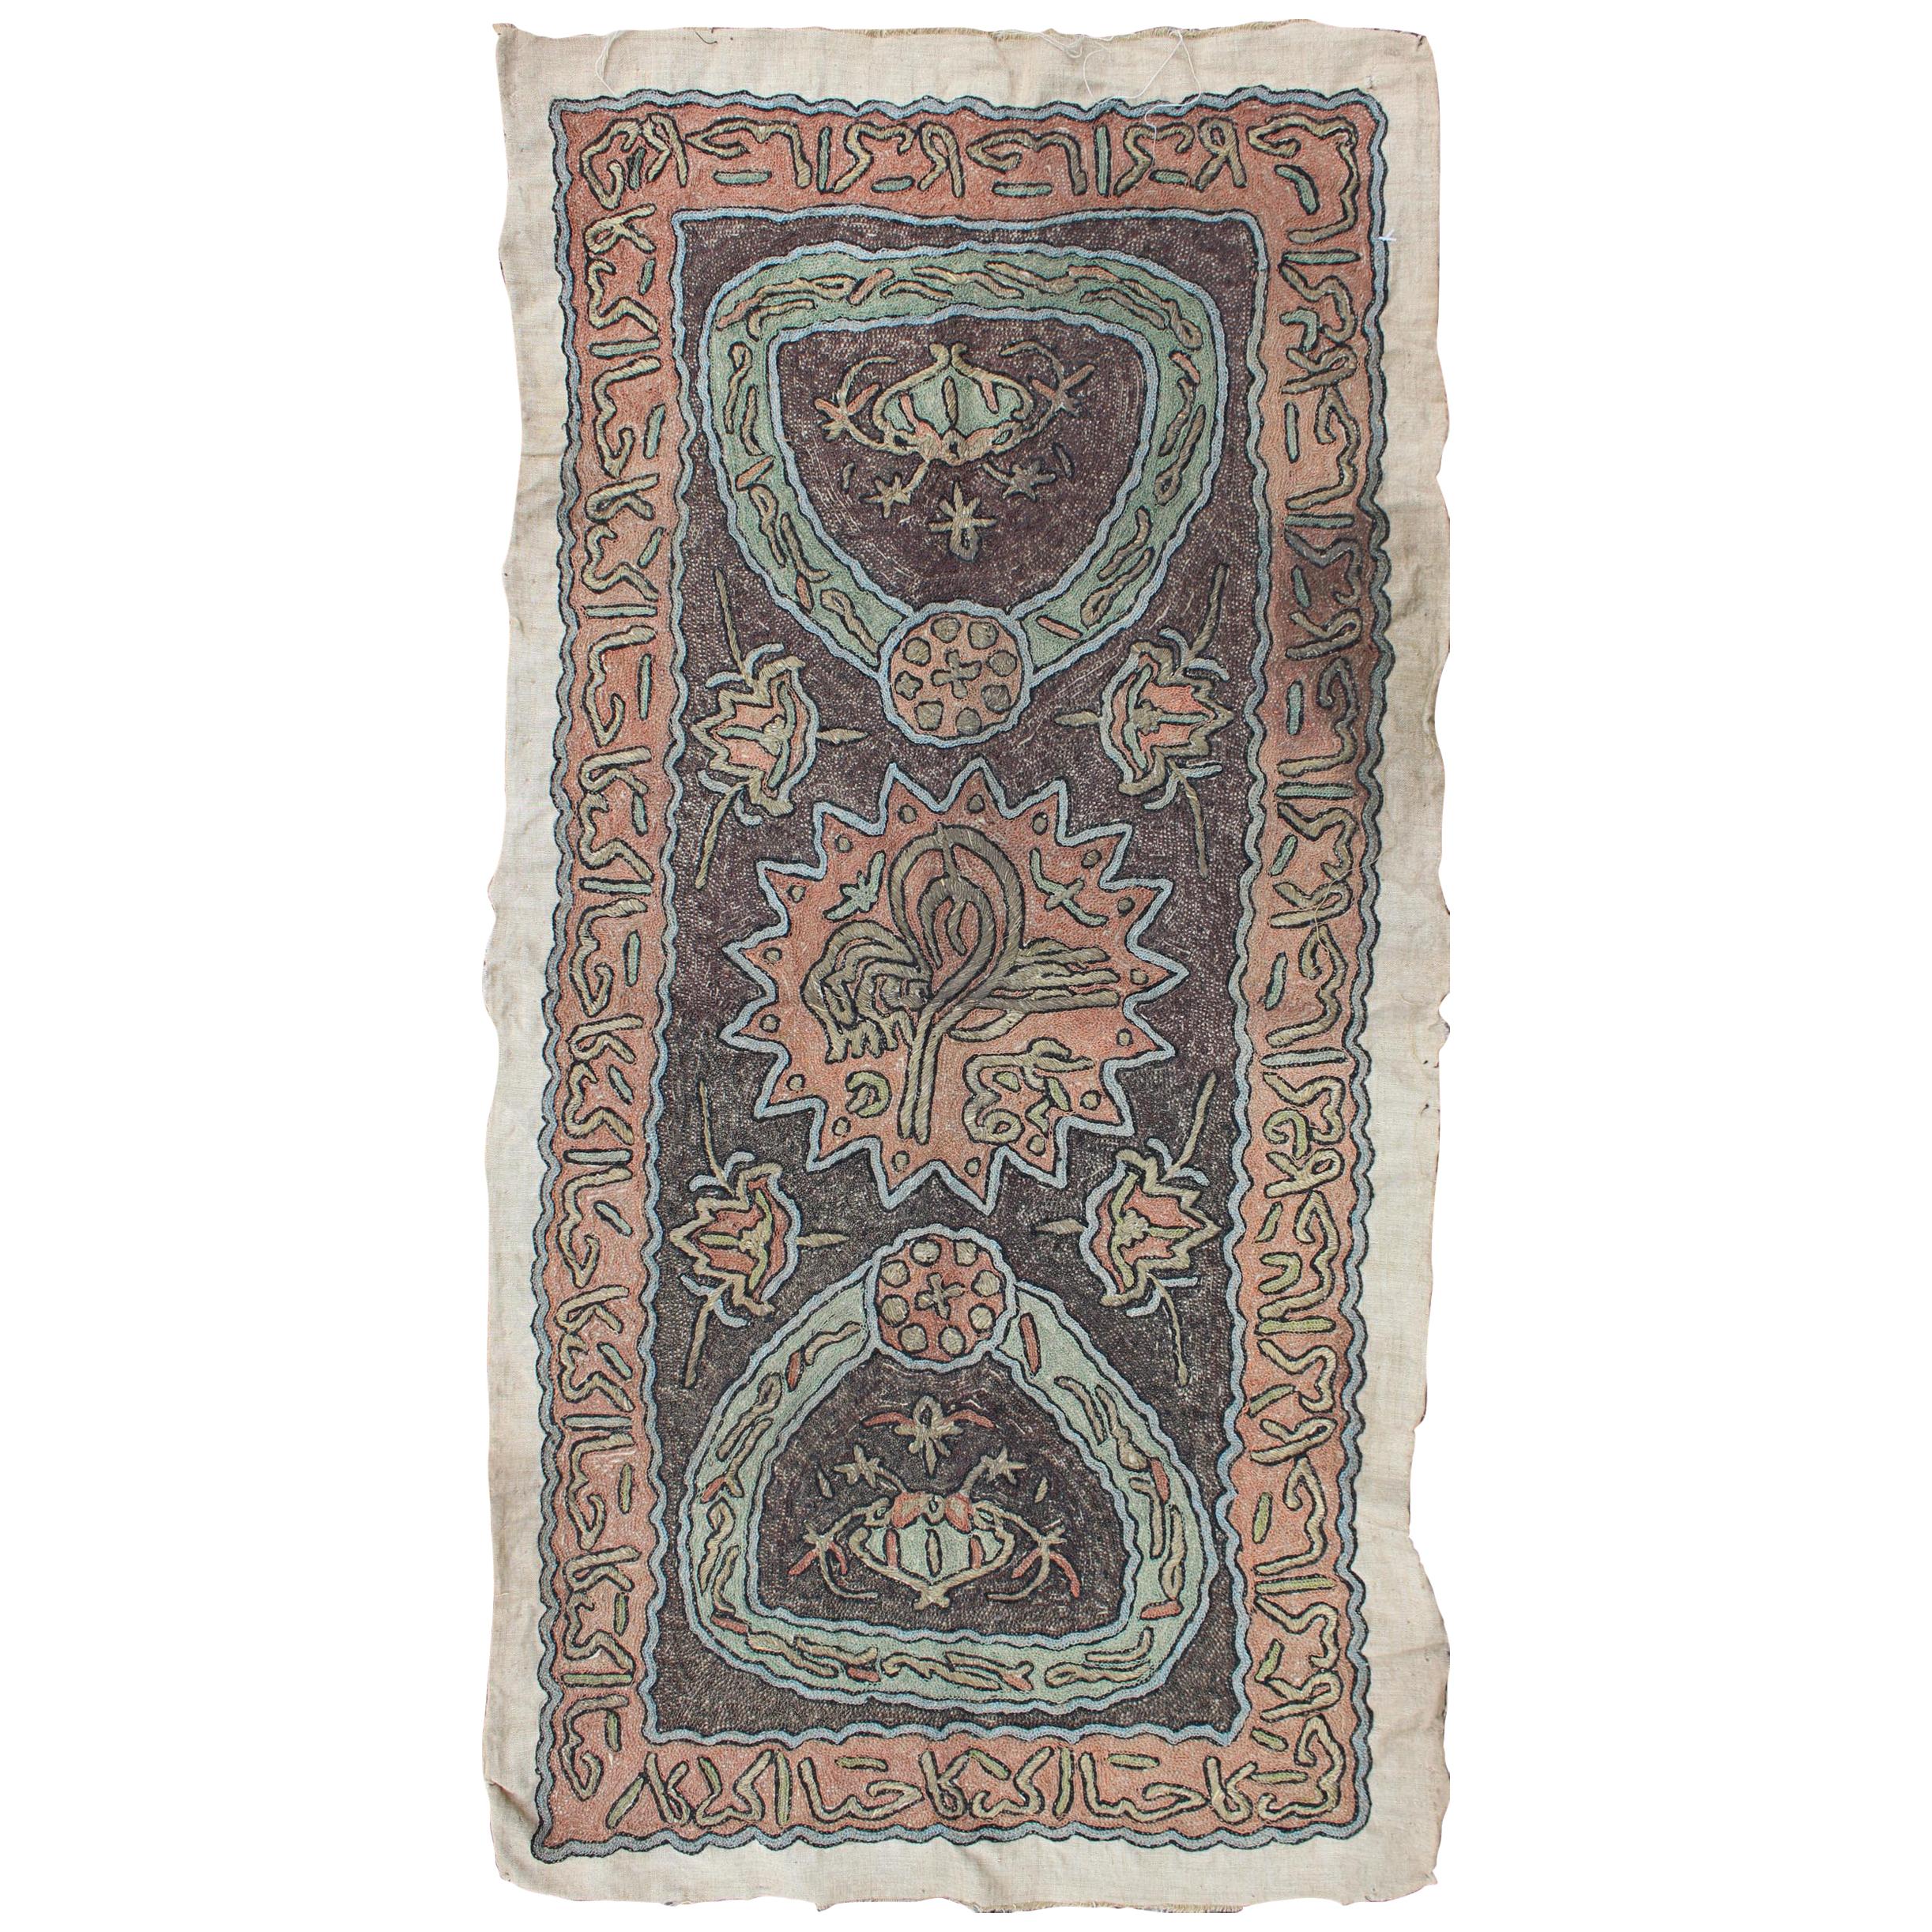 Antique Turkish Silk Ottoman Flat-Weave Rug with Unique Tribal Geometric Design For Sale